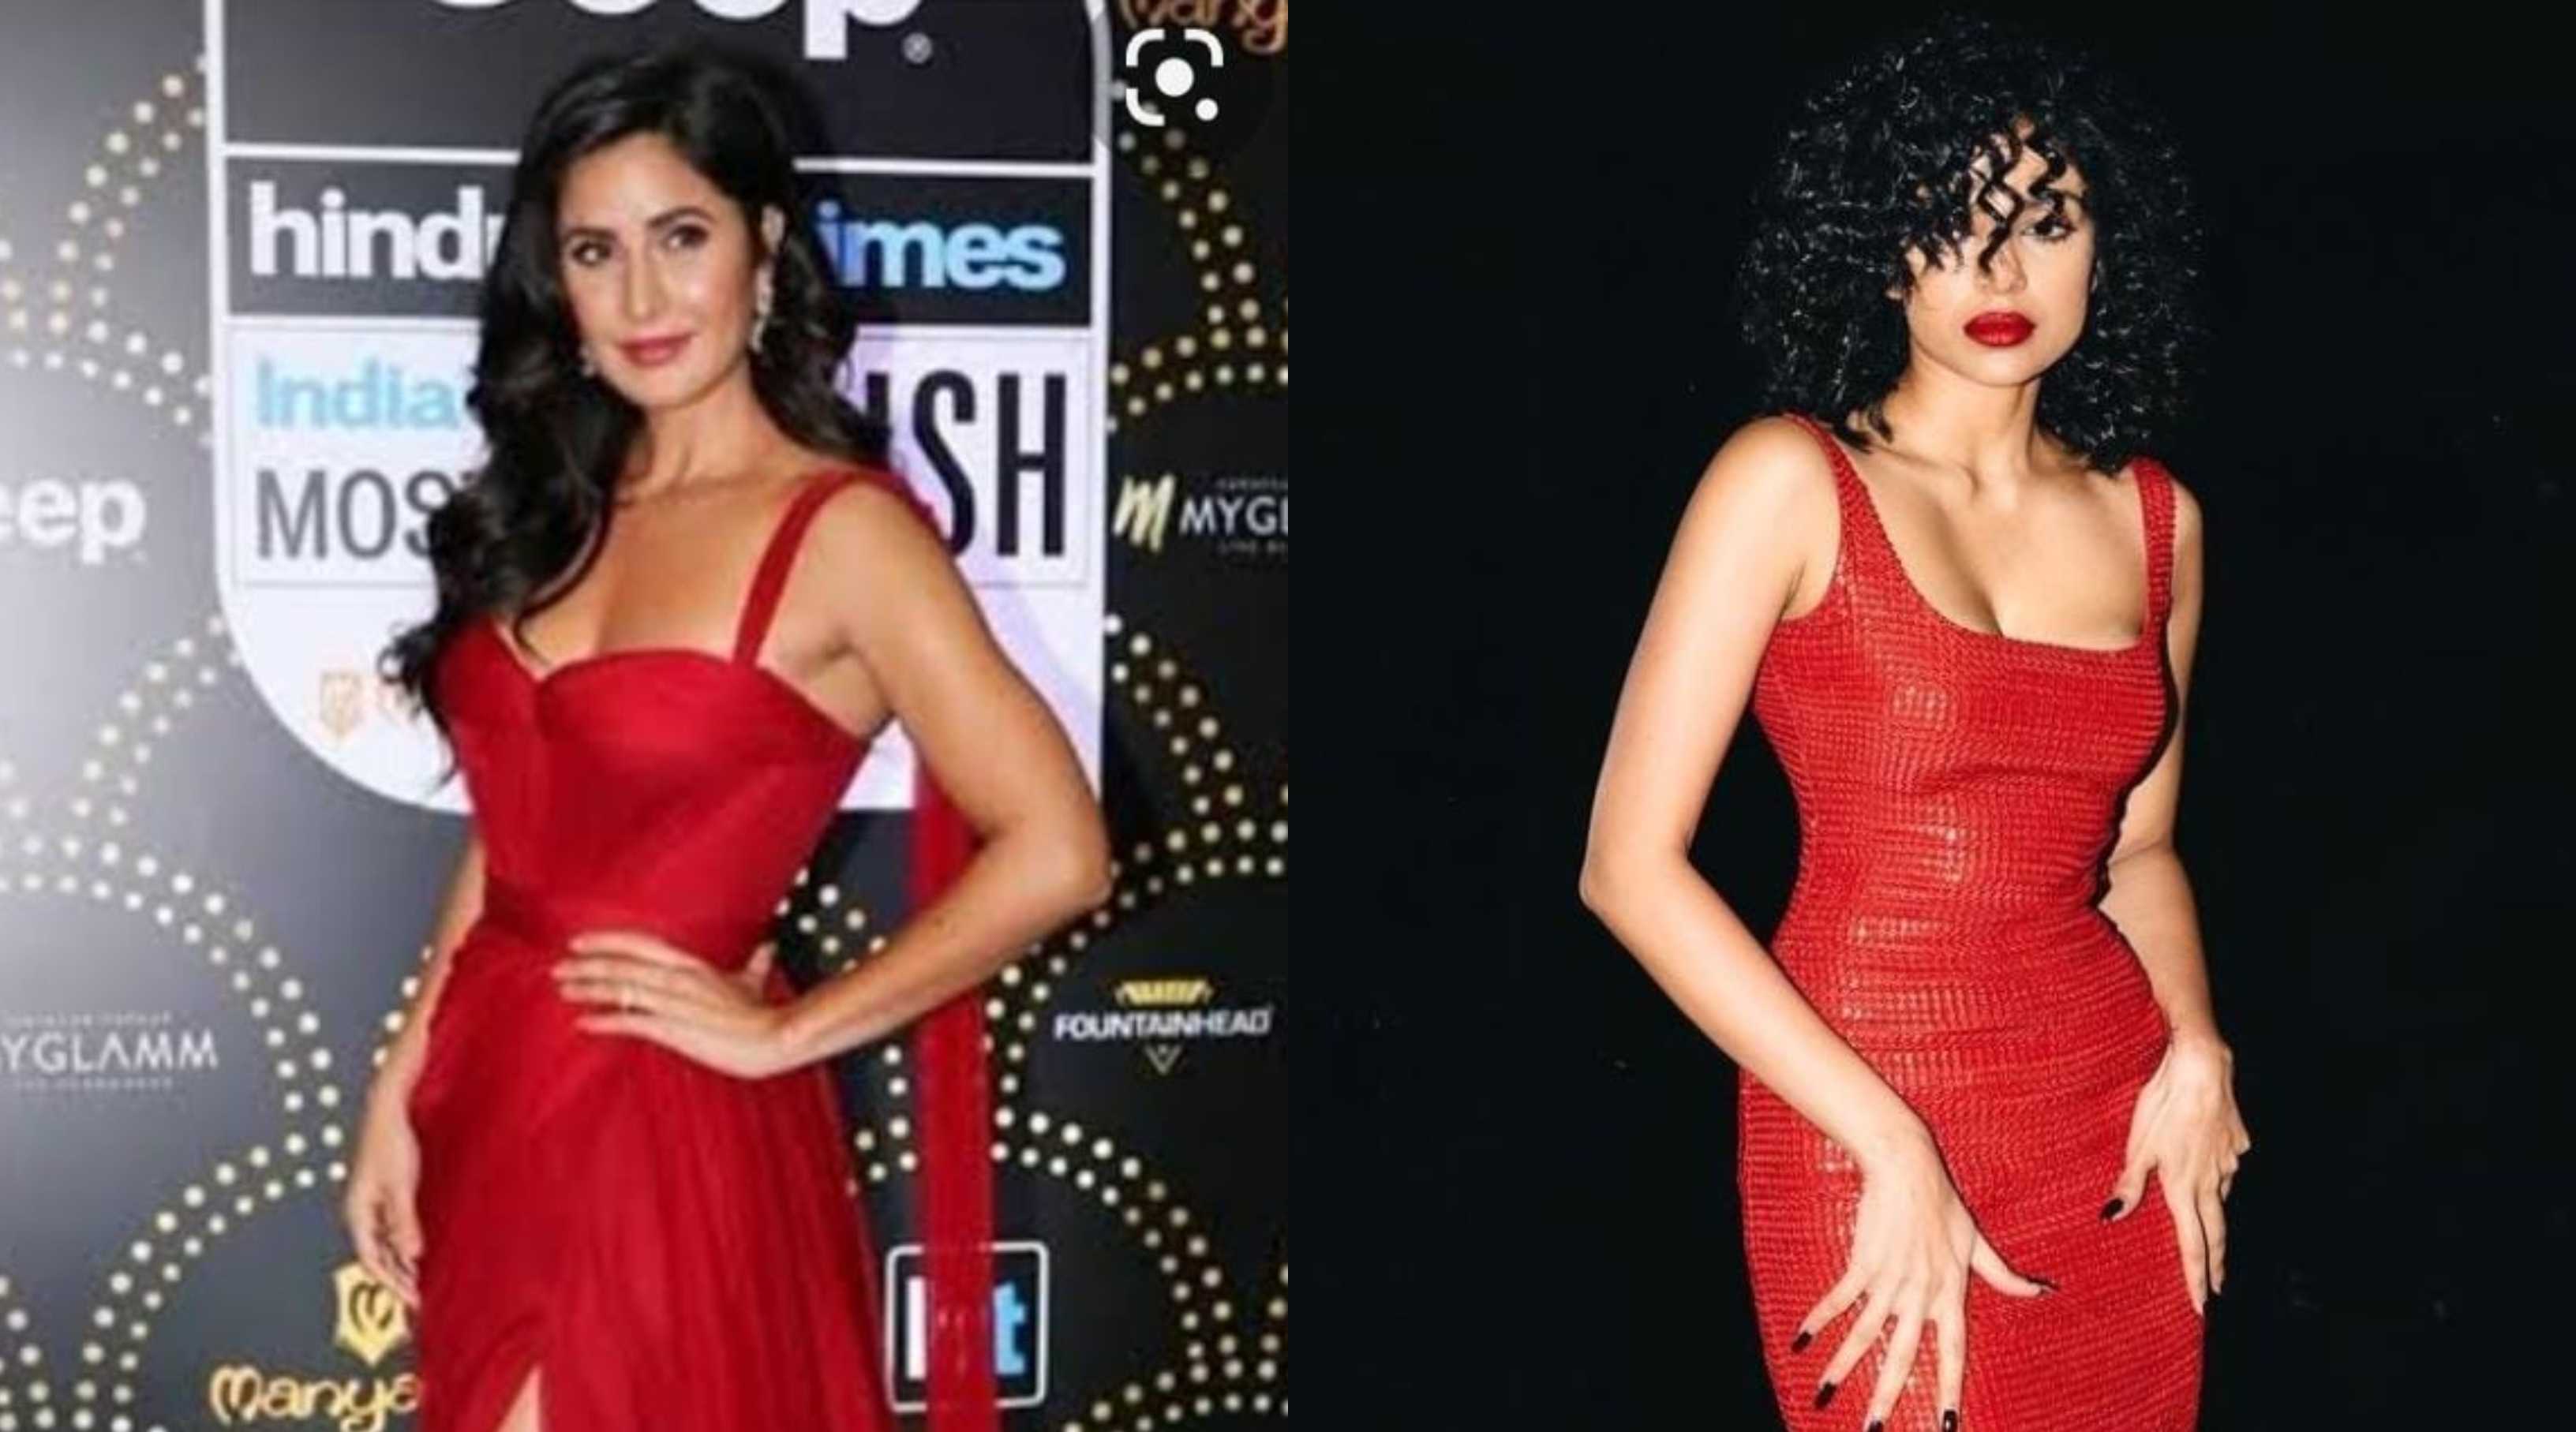 Katrina Kaif, Sobhita Dhulipala and other Bollywood beauties who won our heart each time they wore red